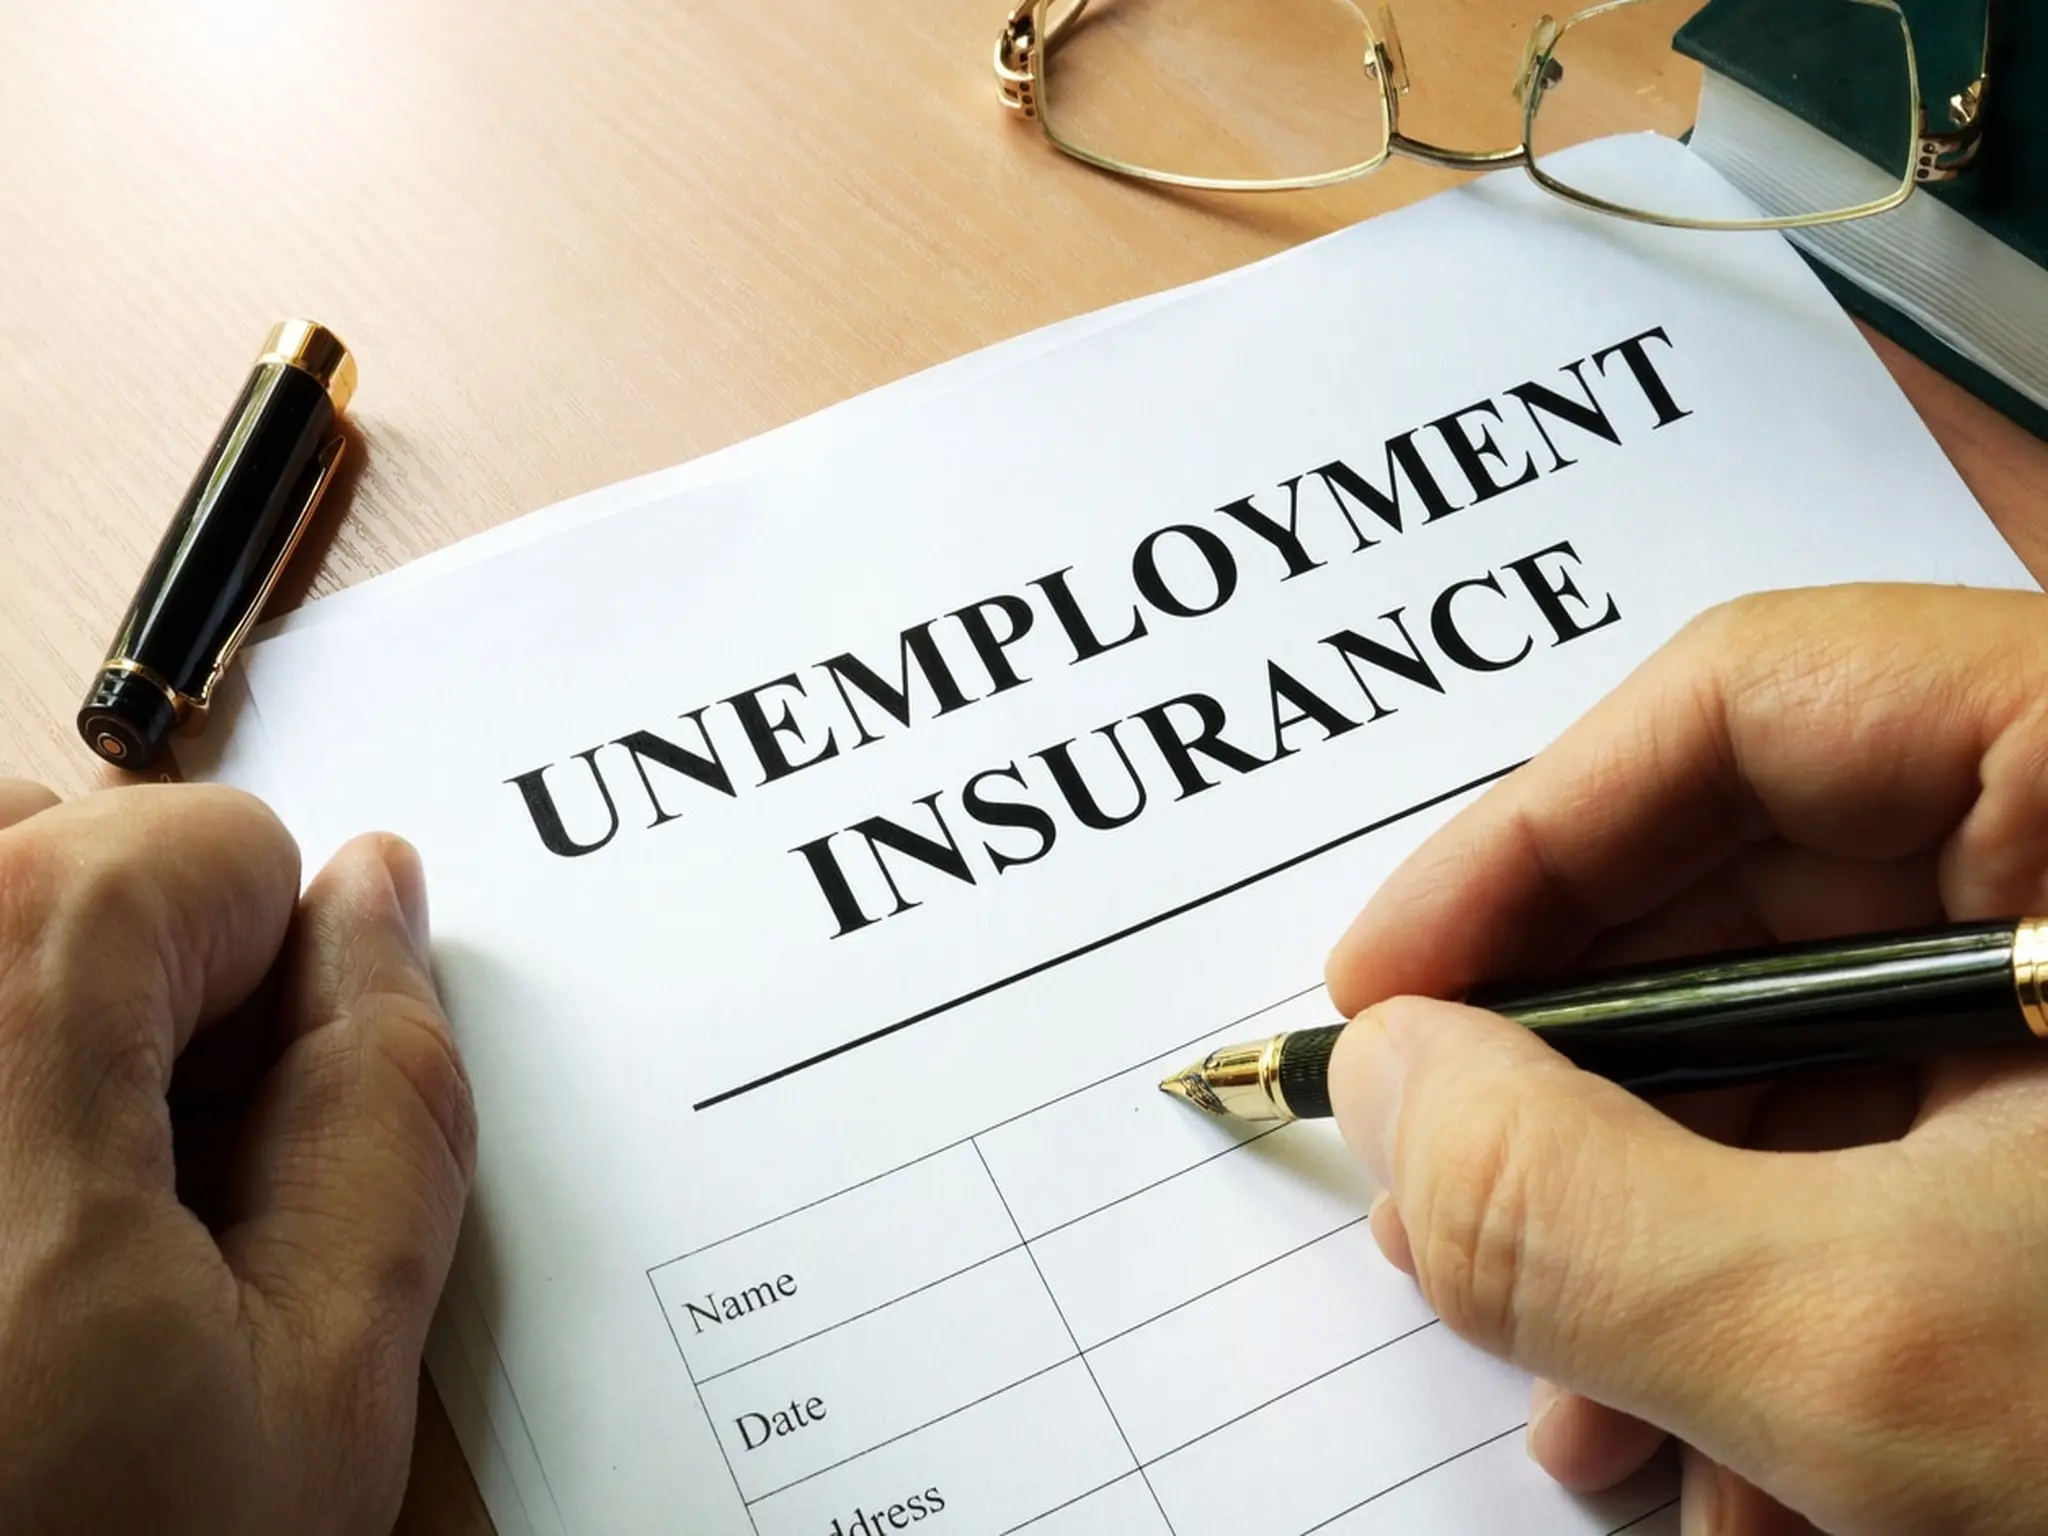 The UAE sets registration instructions in the unemployment insurance scheme